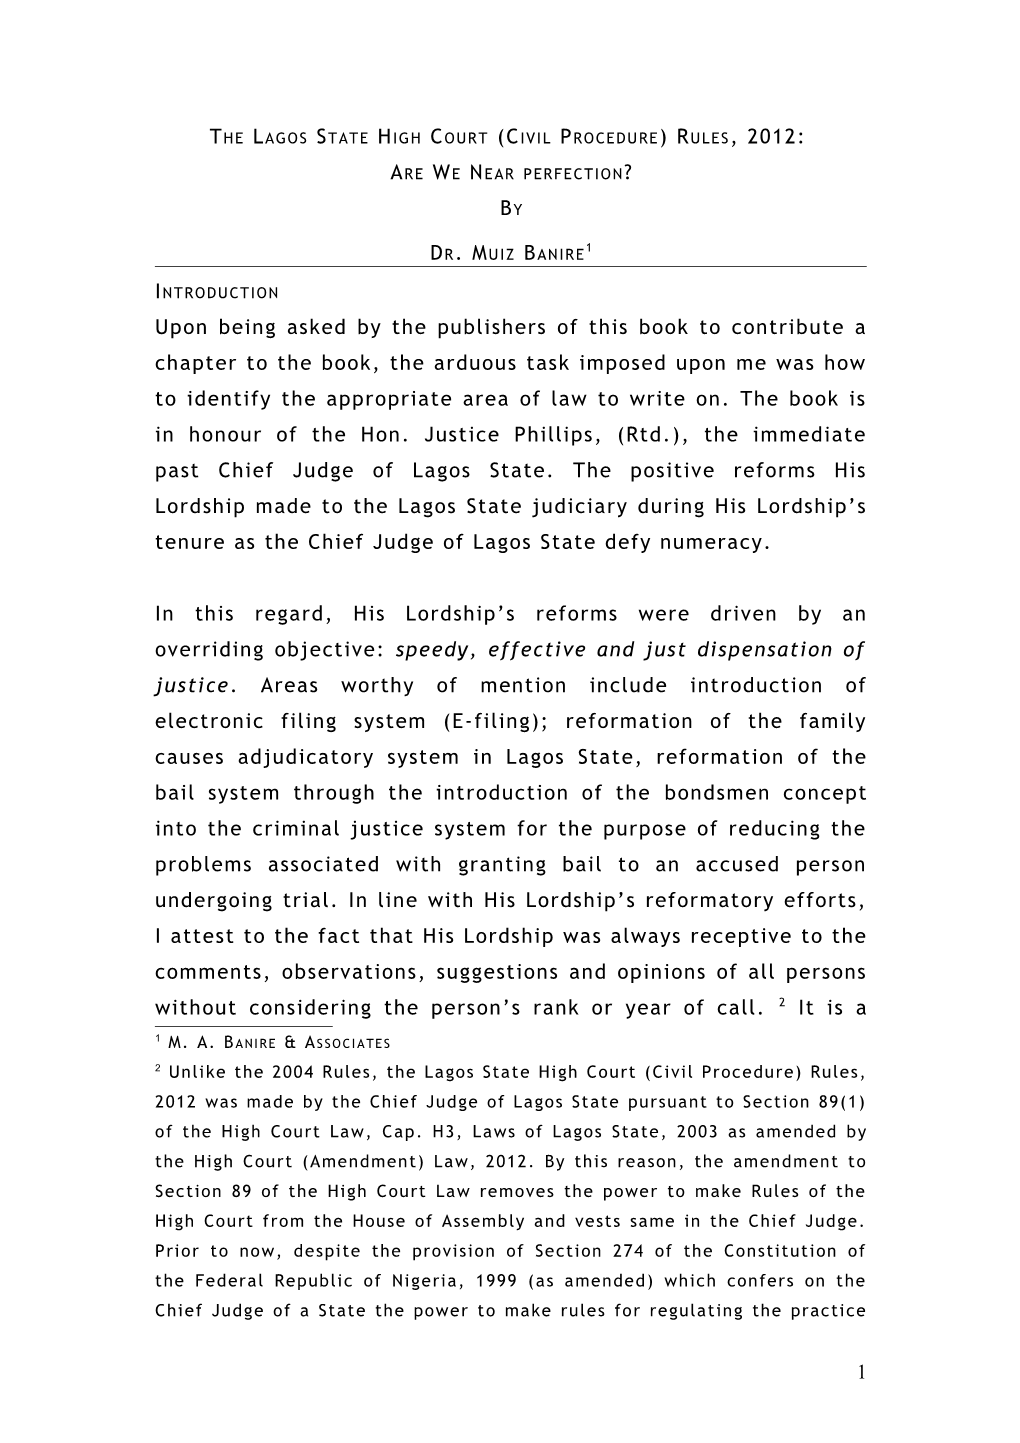 The Lagos State High Court (Civil Procedure) Rules, 2012